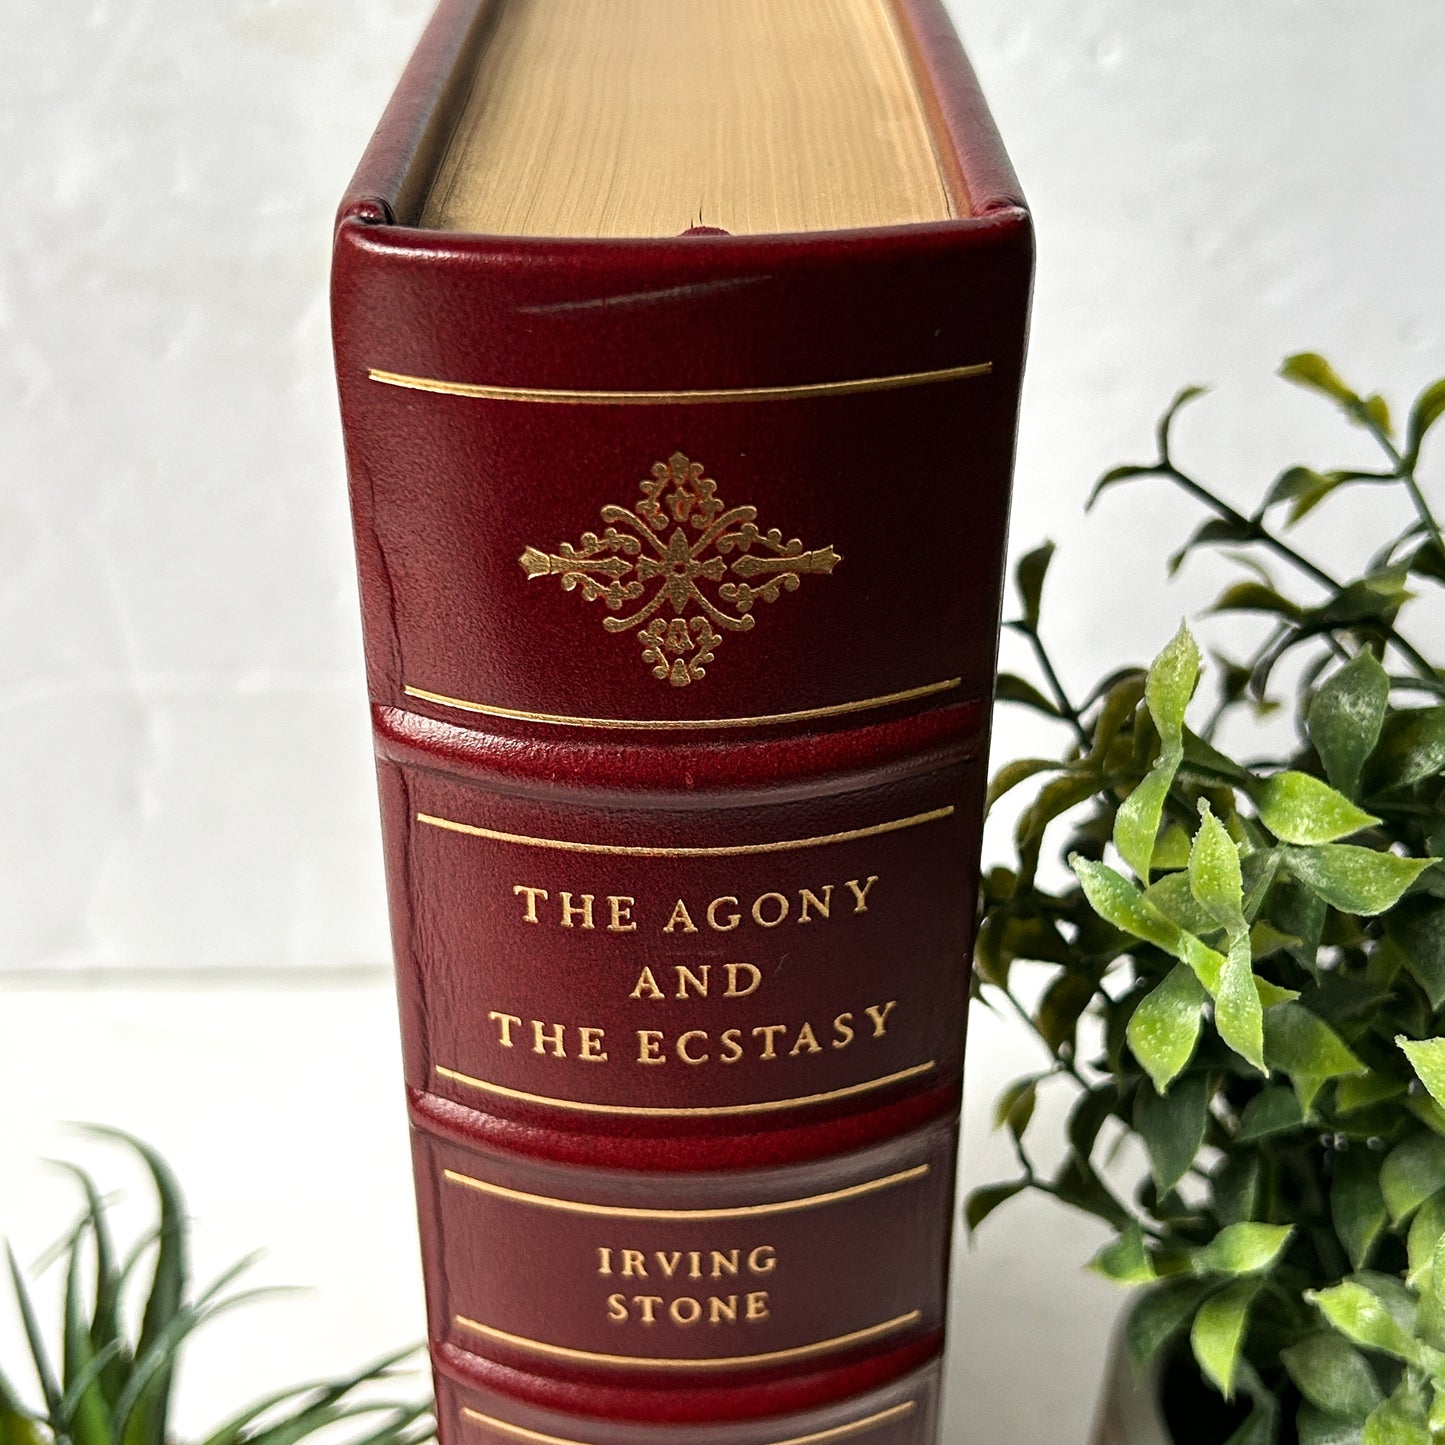 Agony and the Ecstasy by Irving Stone, Signed by the Author, Vintage edition from The Franklin Library